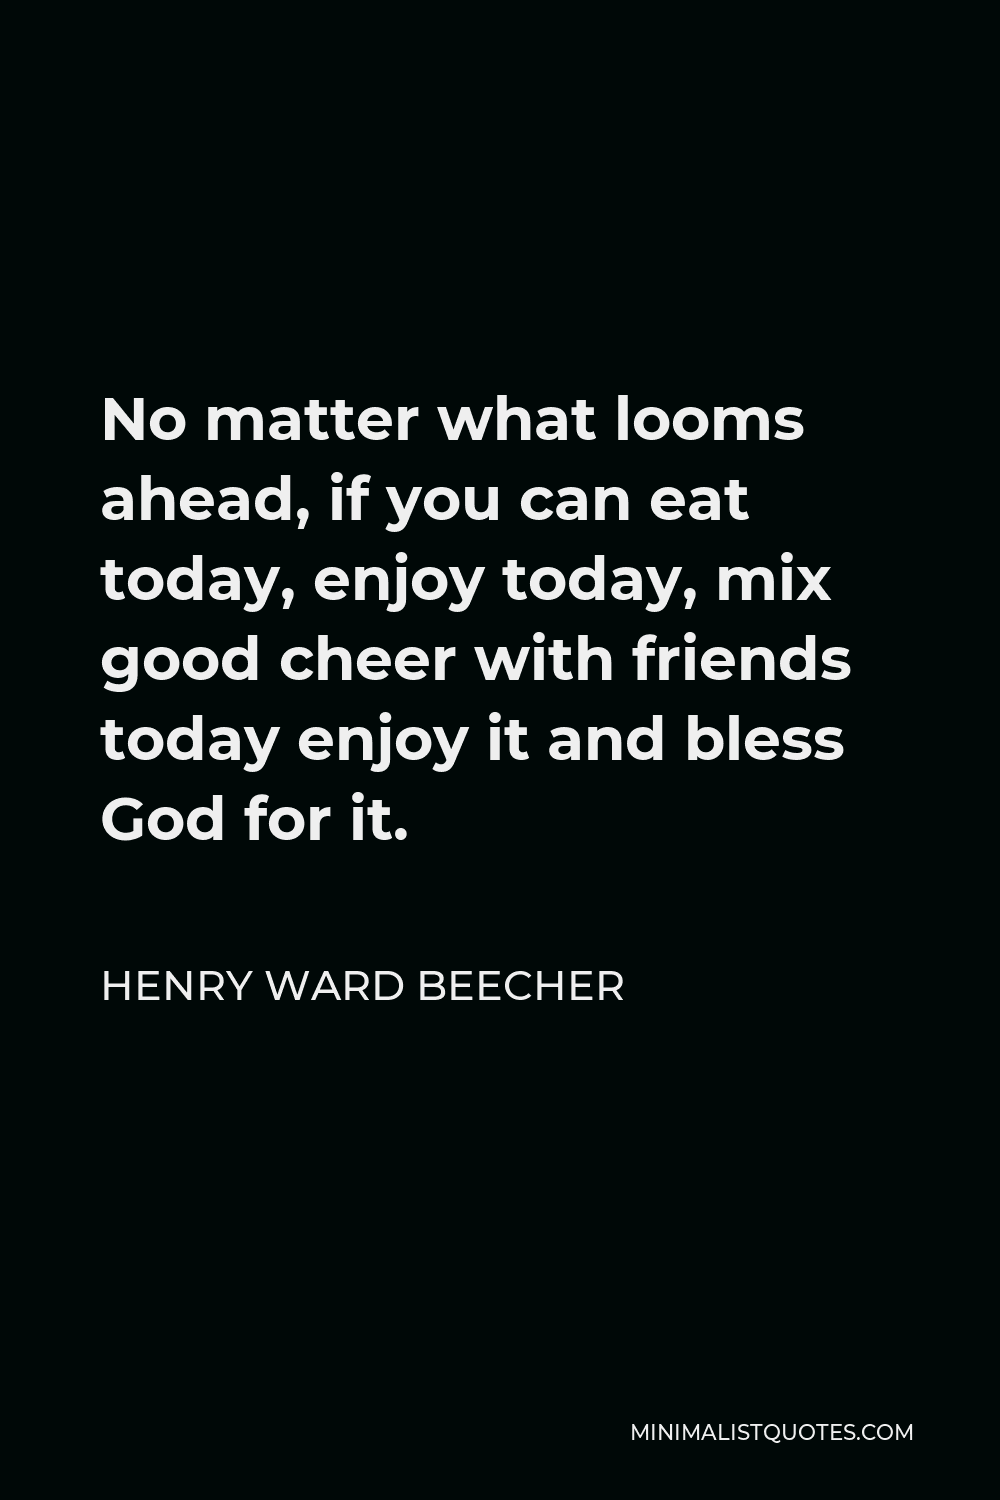 Henry Ward Beecher Quote - No matter what looms ahead, if you can eat today, enjoy today, mix good cheer with friends today enjoy it and bless God for it.